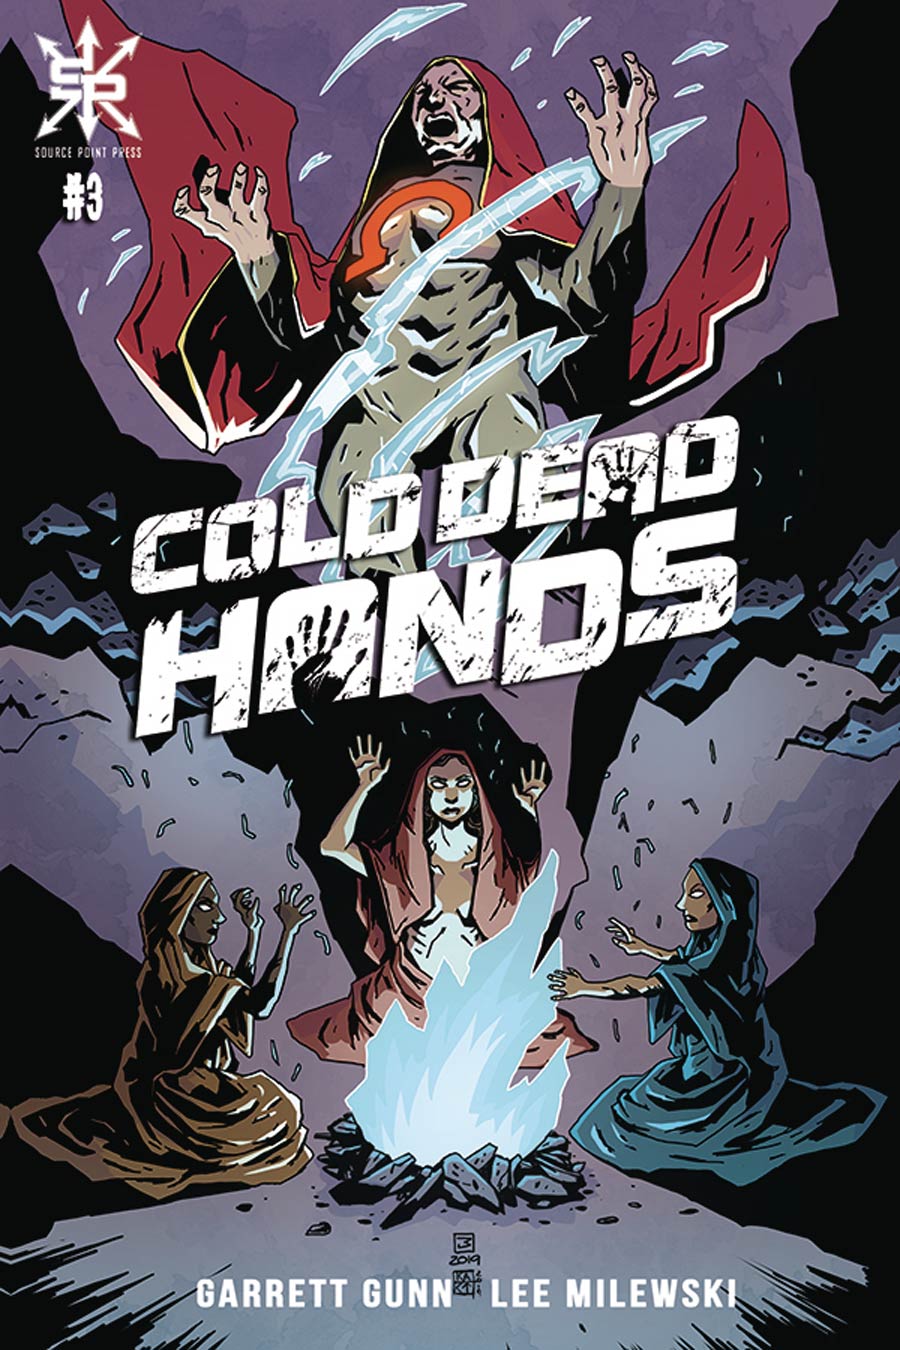 Cold Dead Hands #3